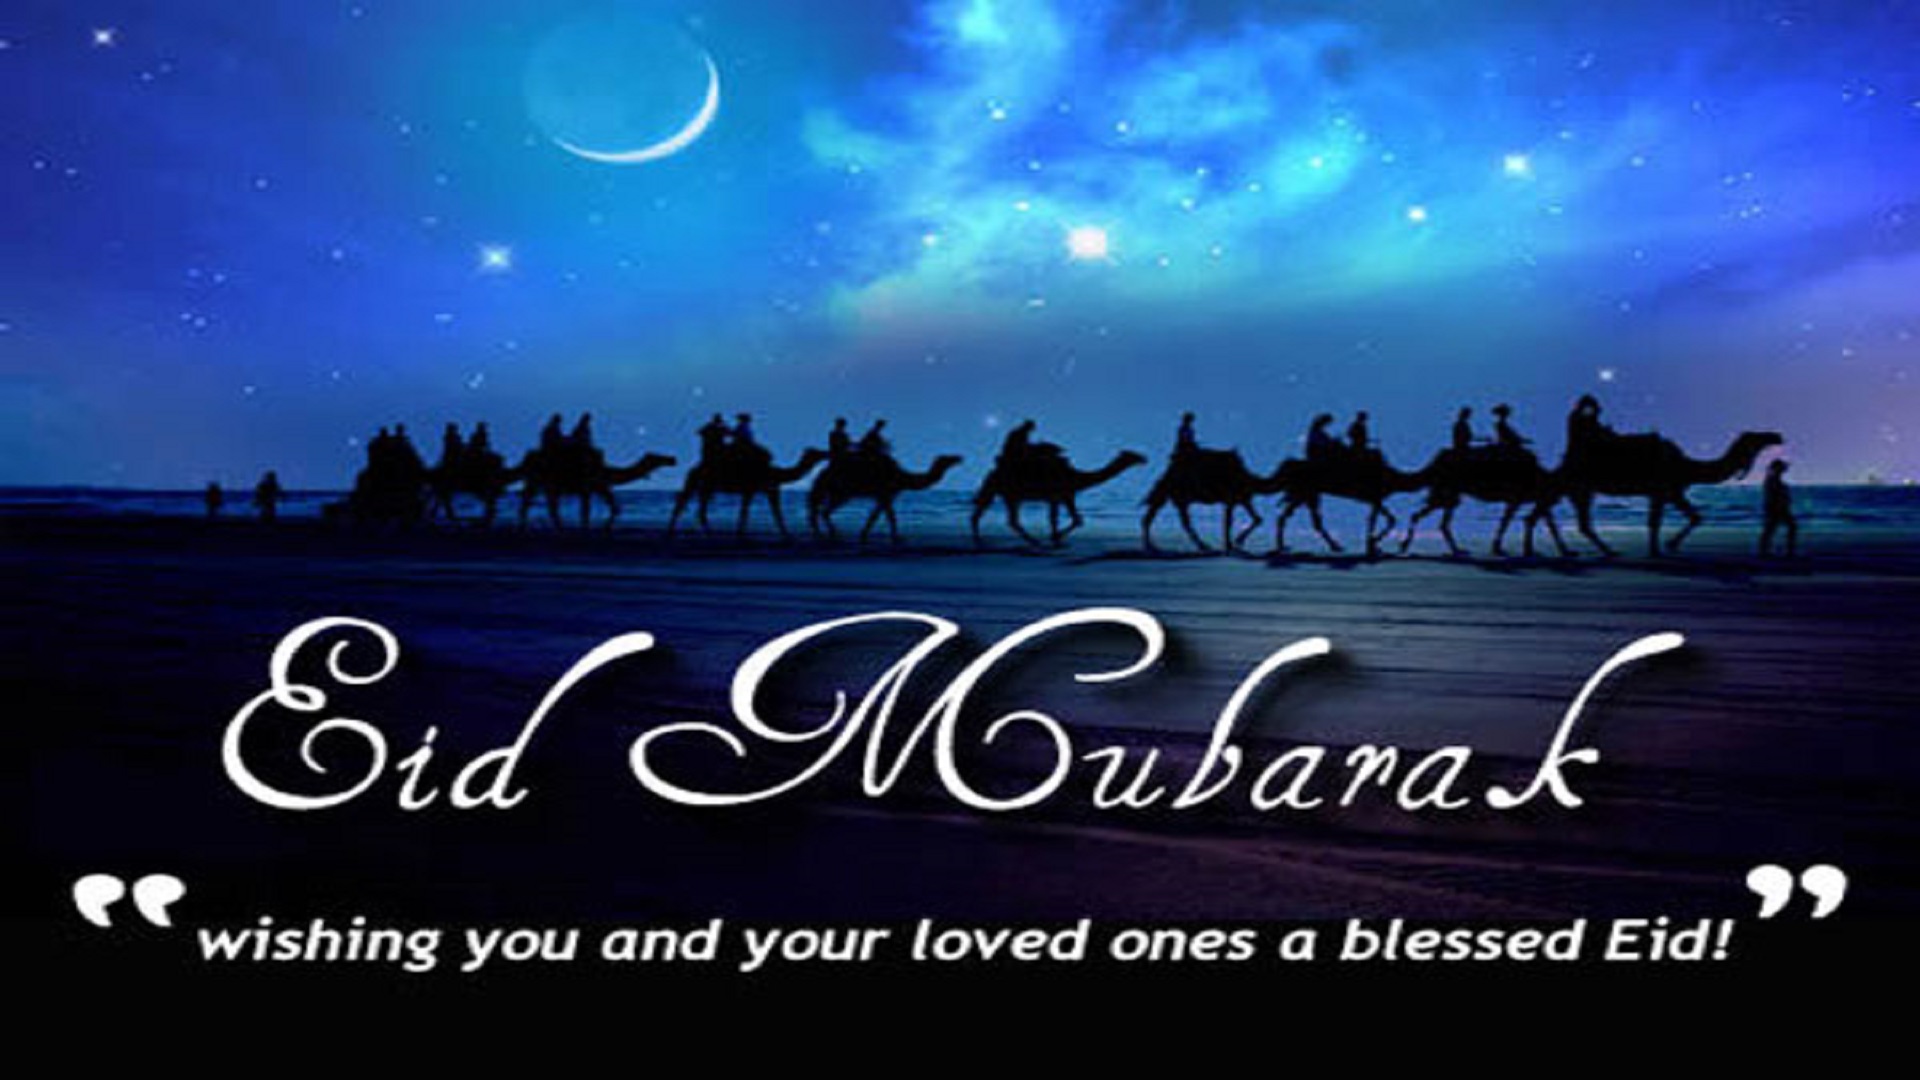 Eid Ul Fitr With Loved Once Wishes Mobile Desktop Free Hd Background Pictures